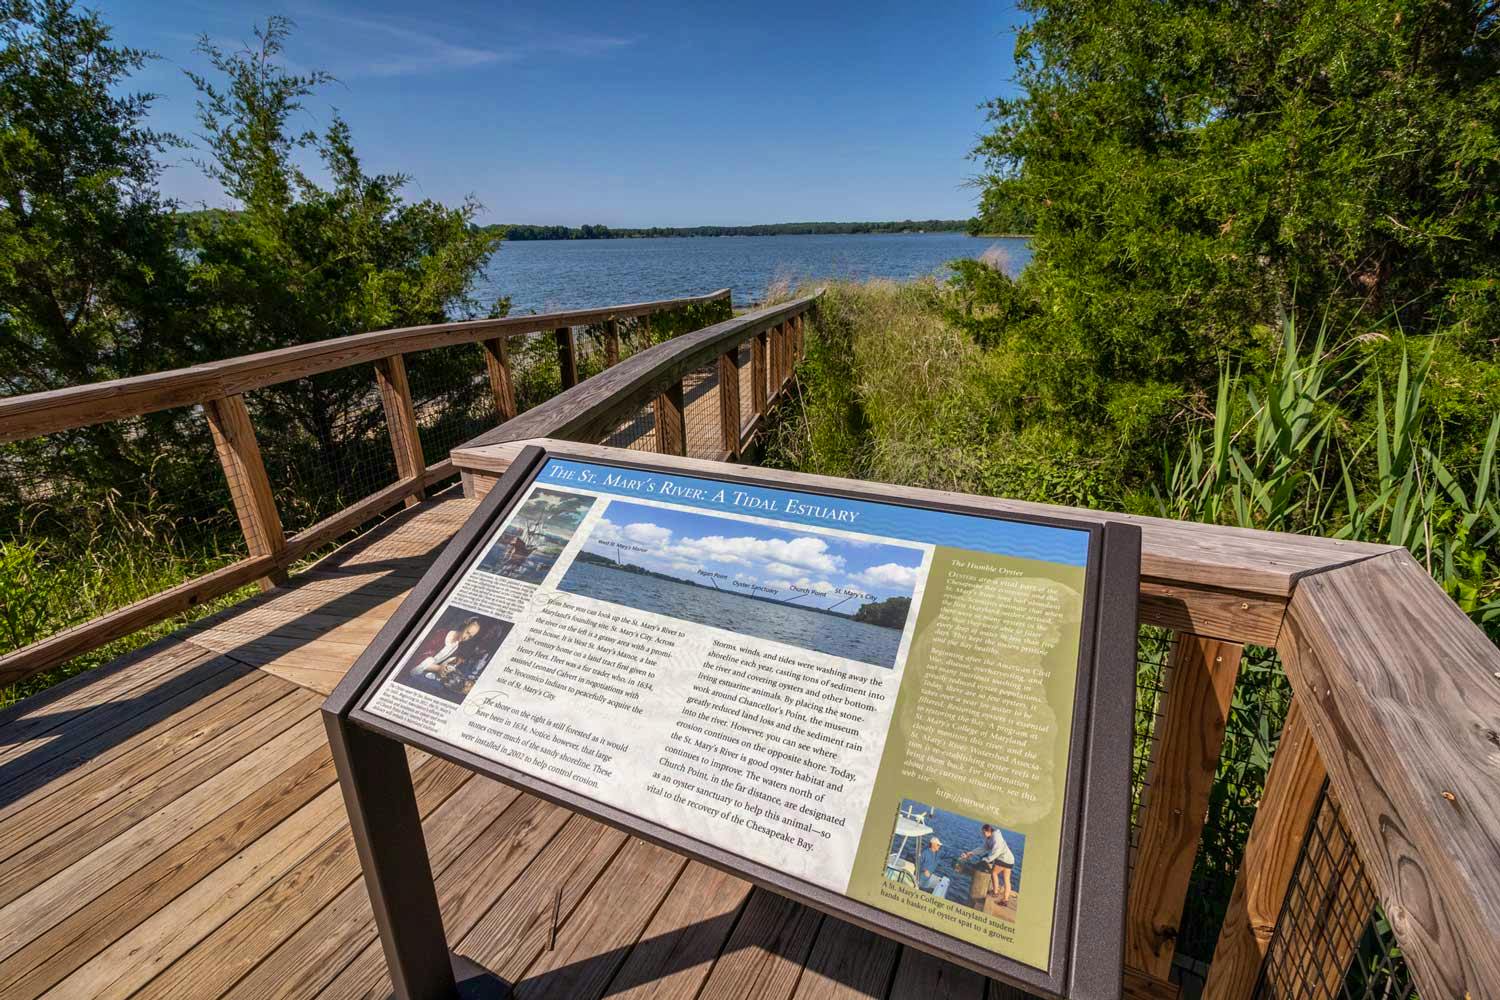 An ADA boardwalk leads to the St. Mary's River - Chancellor's Point